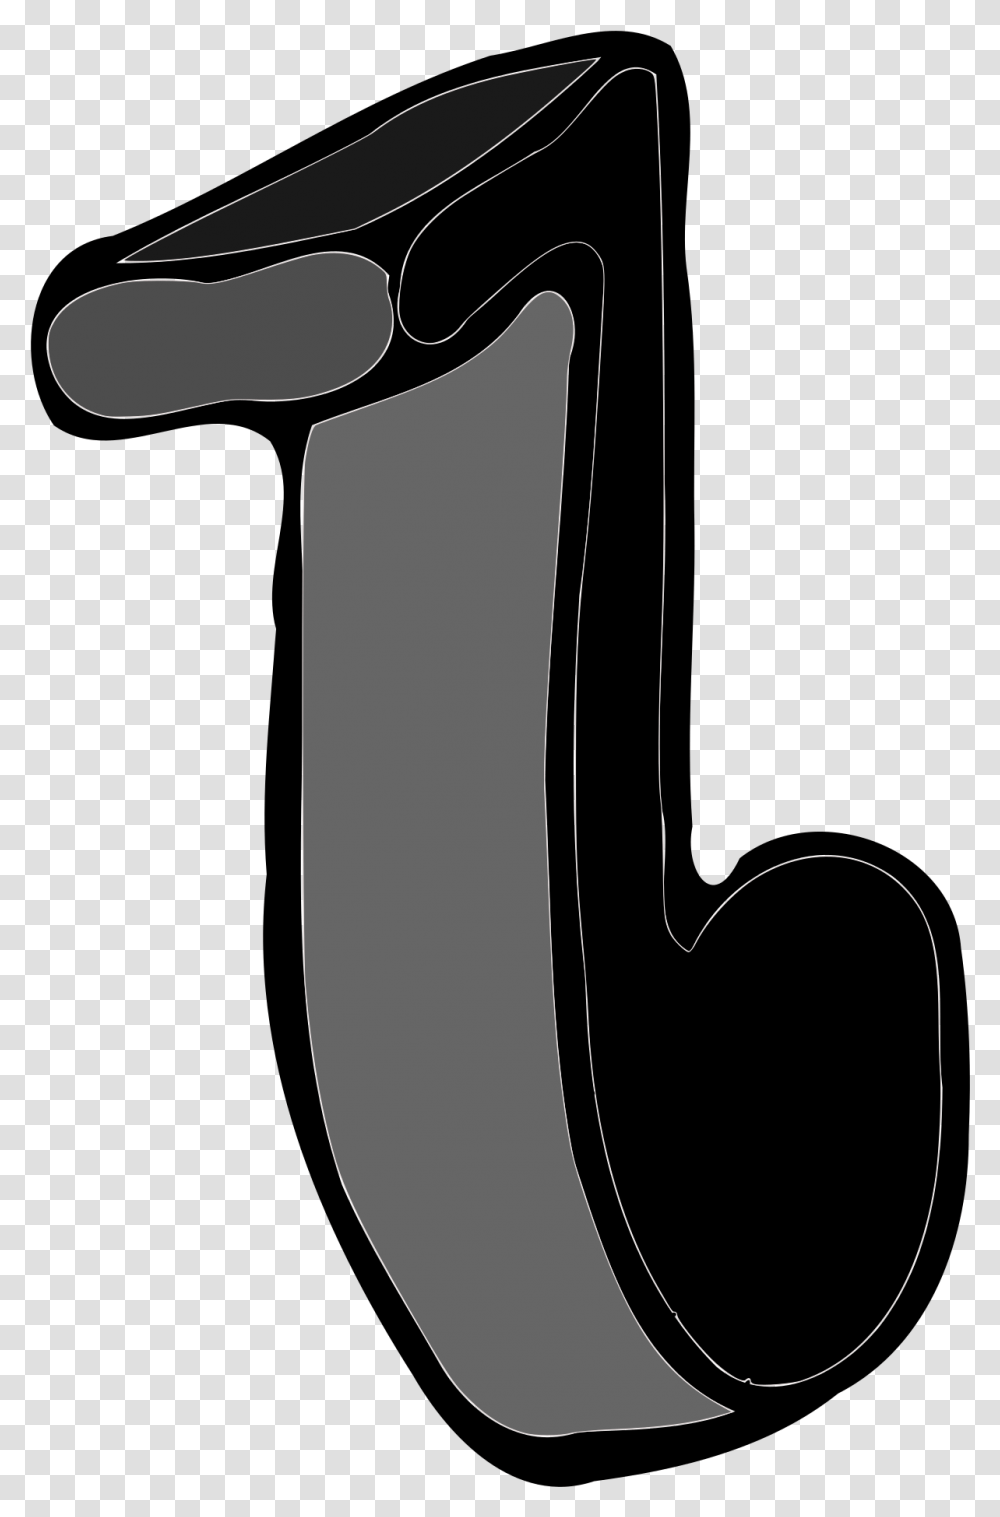 Angleblackblack And White, Axe, Tool, Hammer, Can Opener Transparent Png